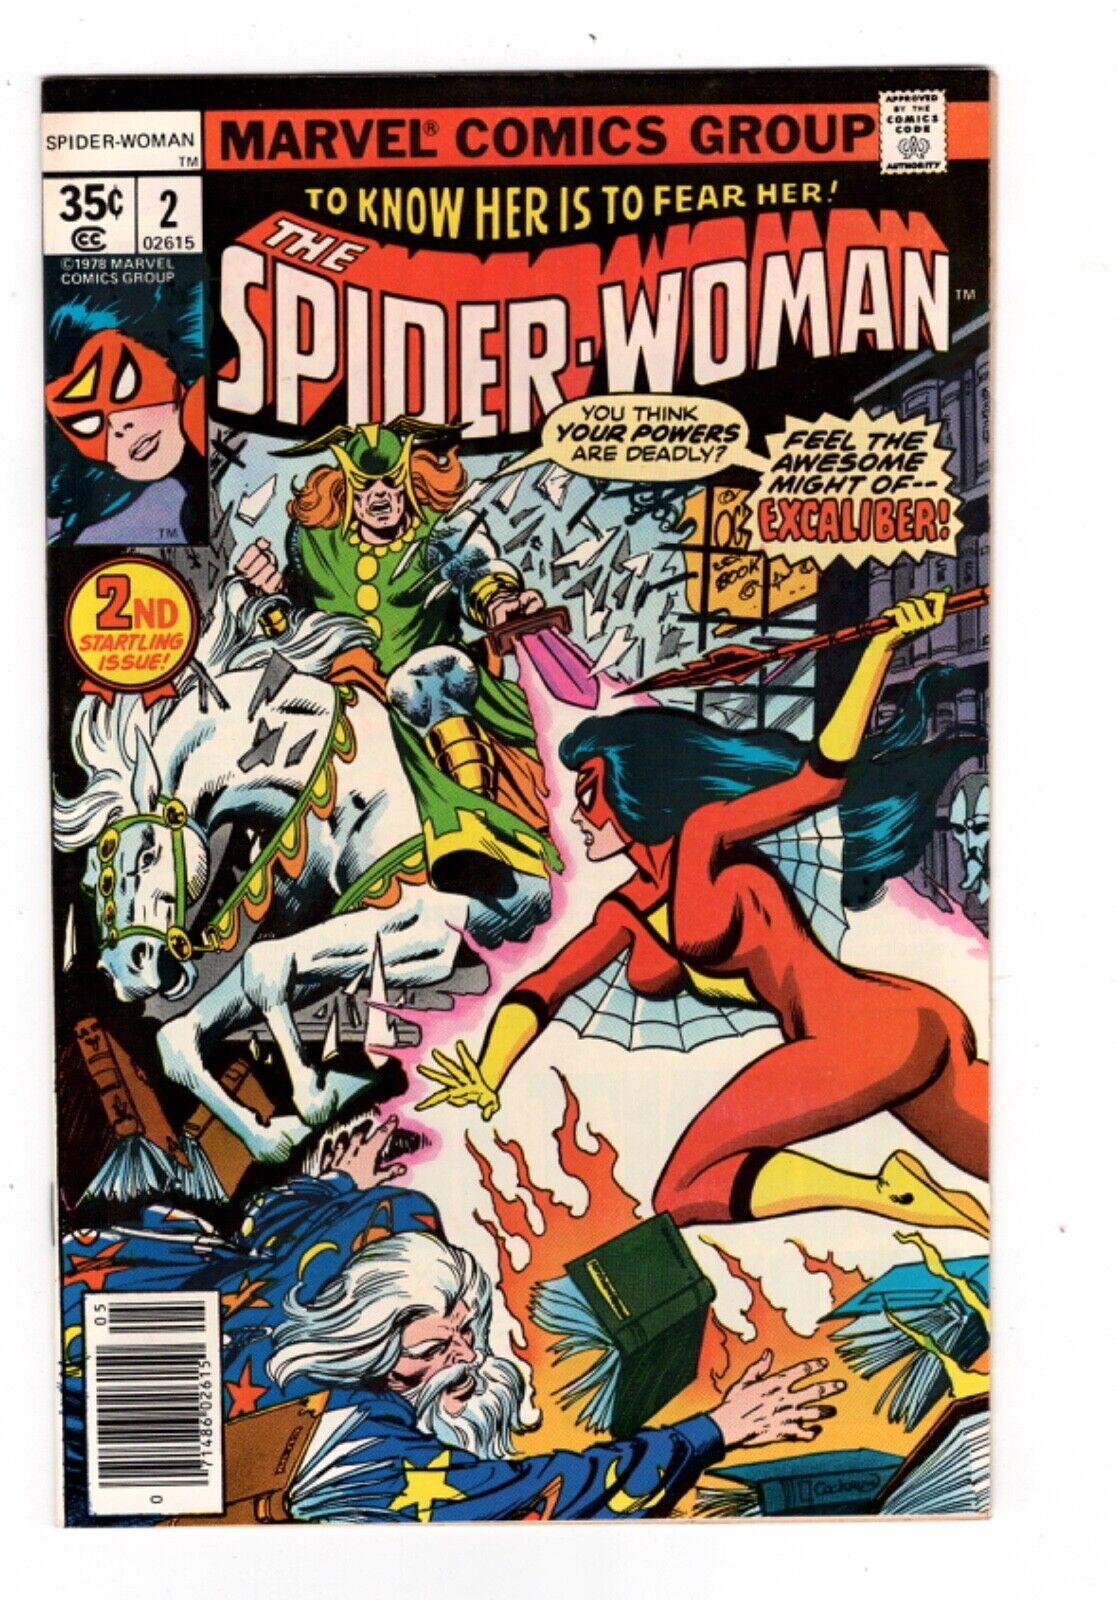 Spider-Woman #2, VF+ 8.5, 1st Appearance Morgan Le Fay